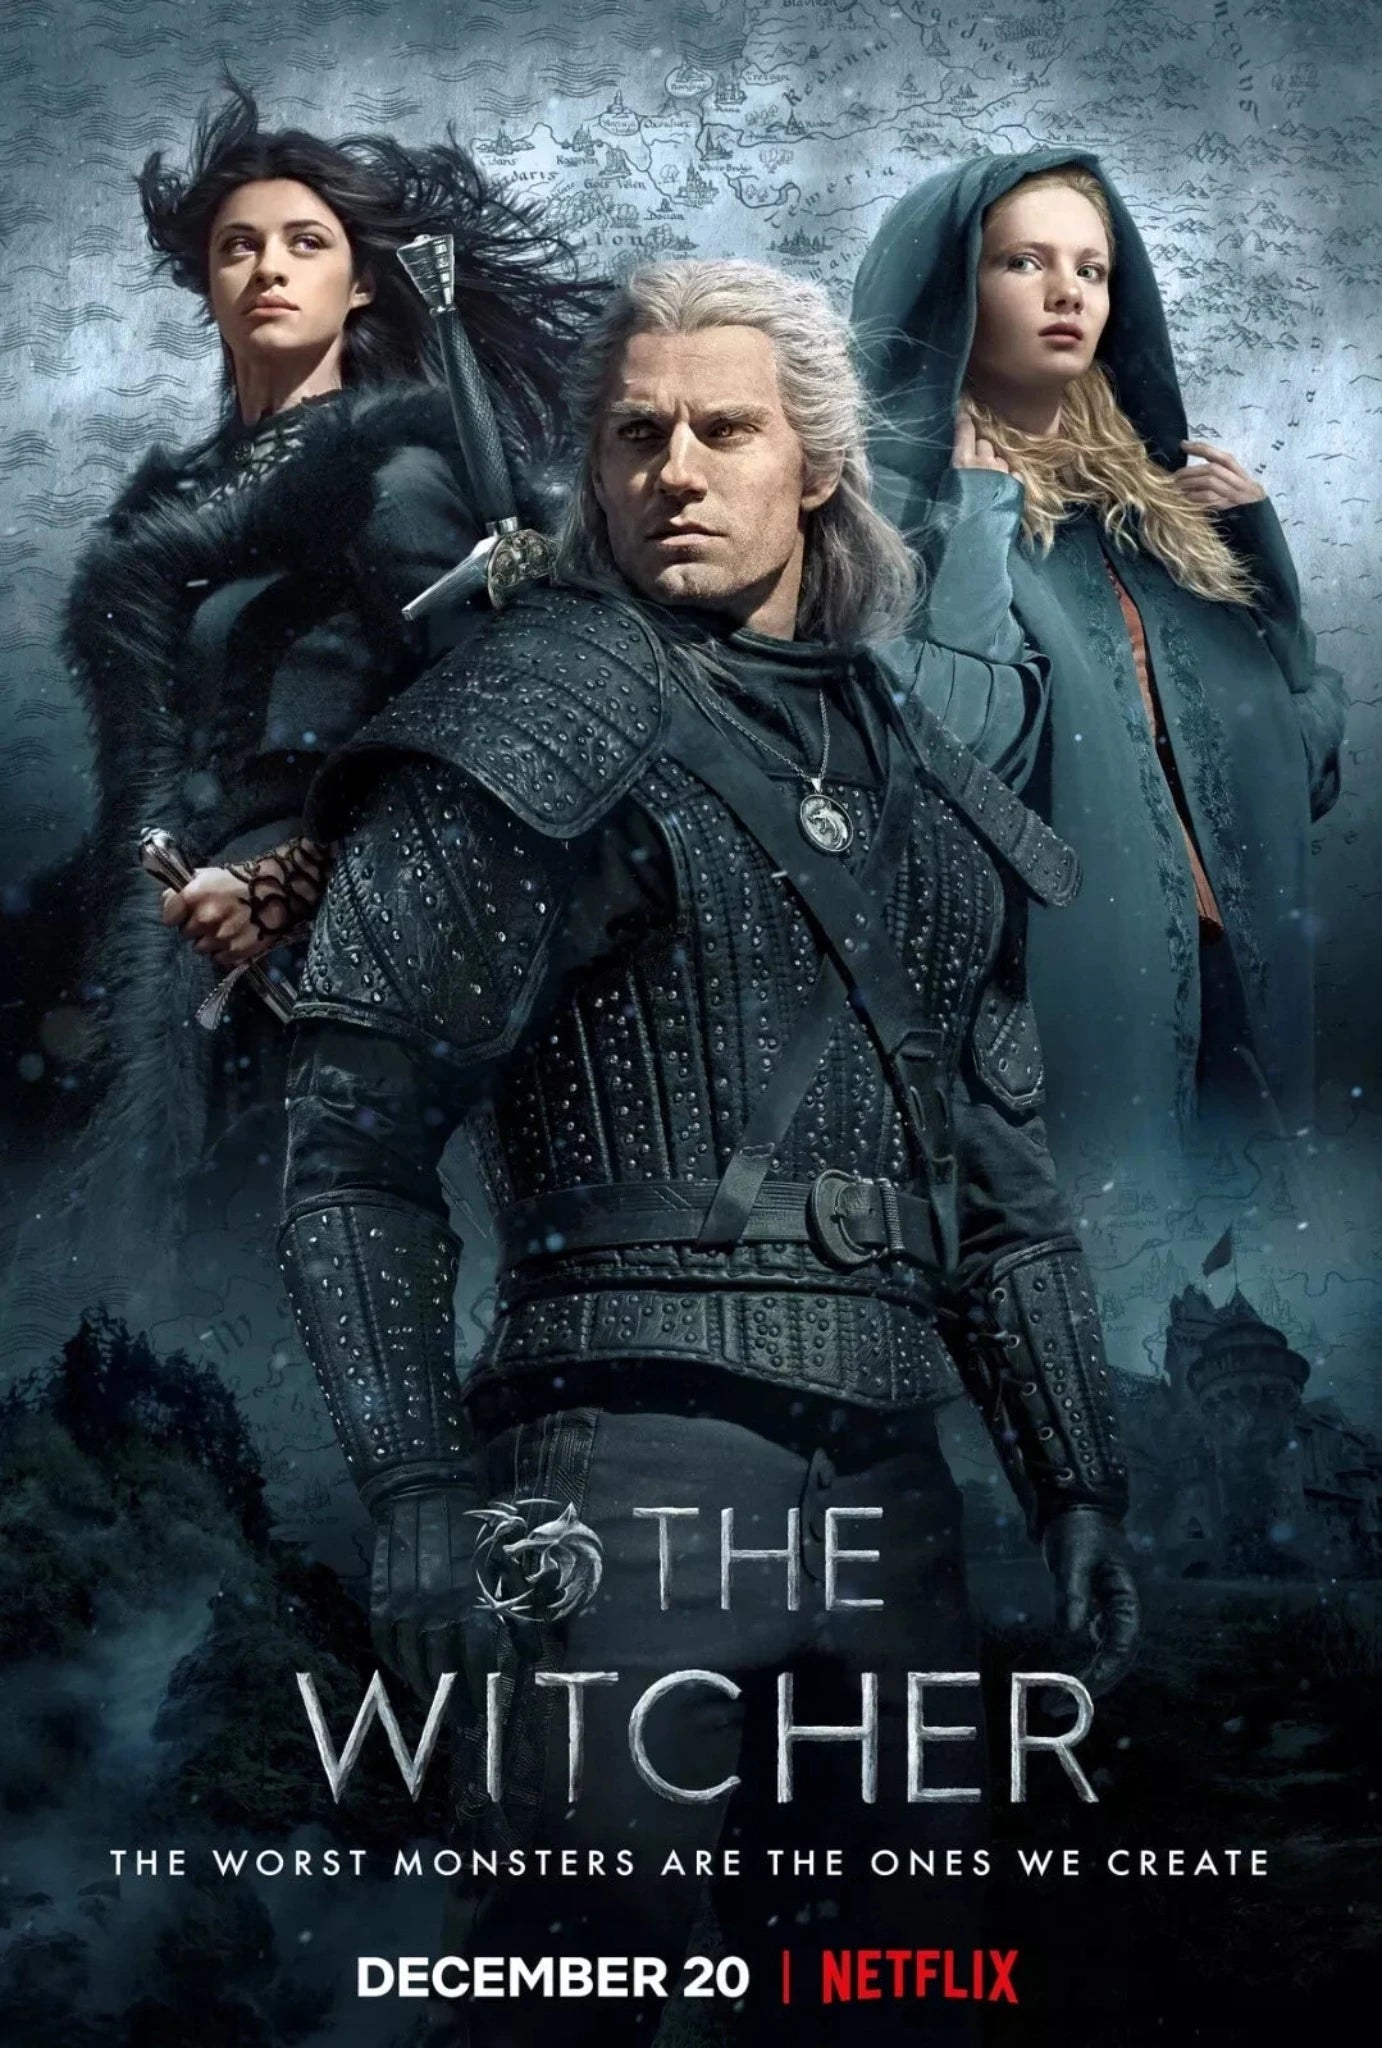 The Witcher Season 1 Complete Pack 2019 Drama - Action - Adventure - Sci-Fi - Fantasy